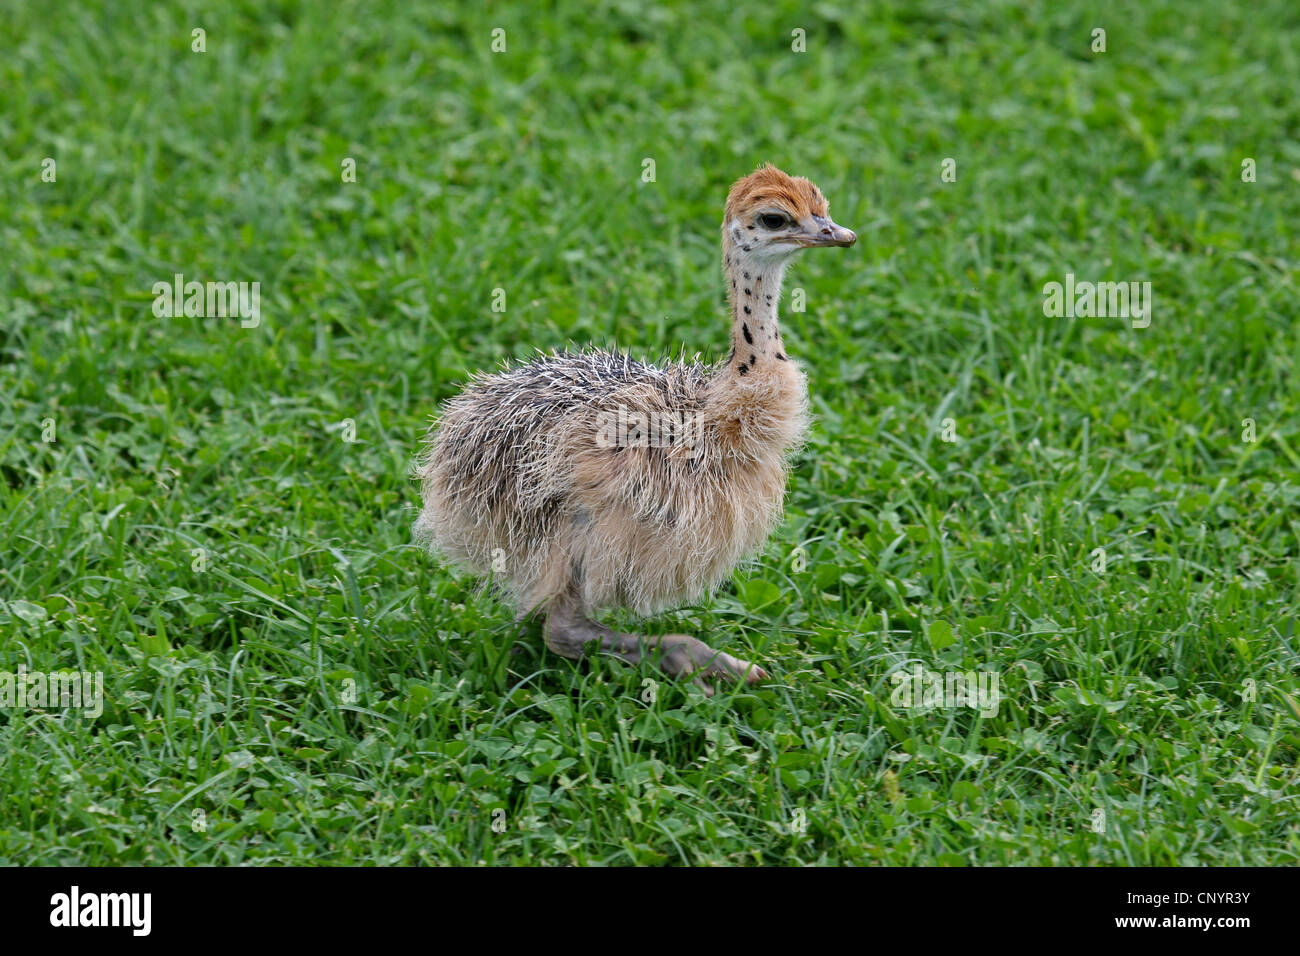 ostrich (Struthio camelus), young Ostrich Stock Photo